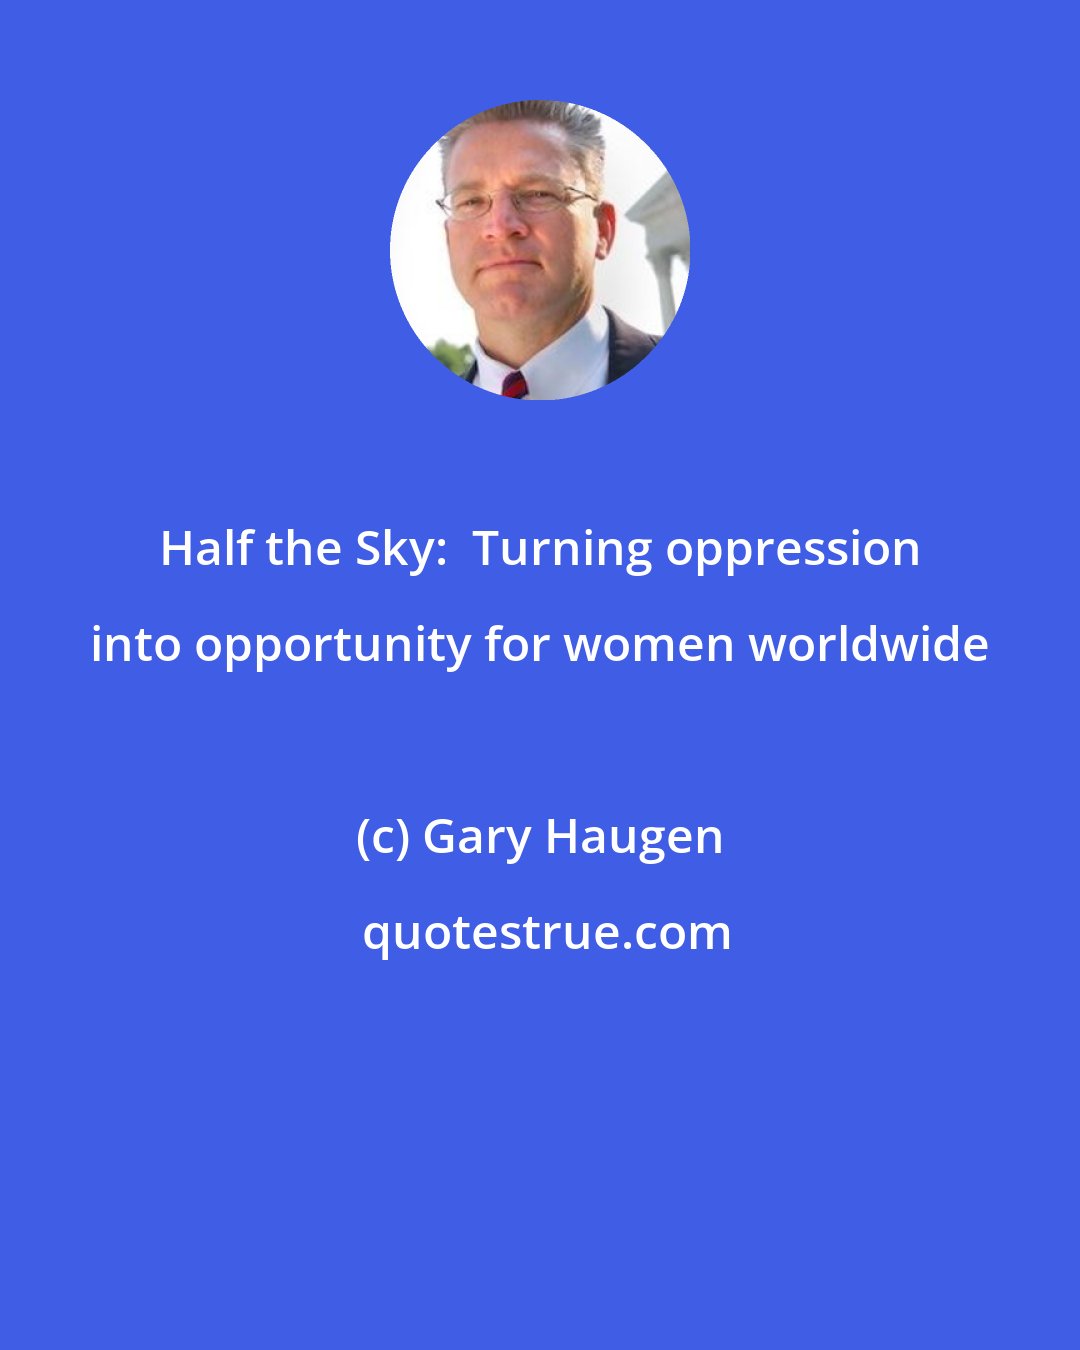 Gary Haugen: Half the Sky:  Turning oppression into opportunity for women worldwide